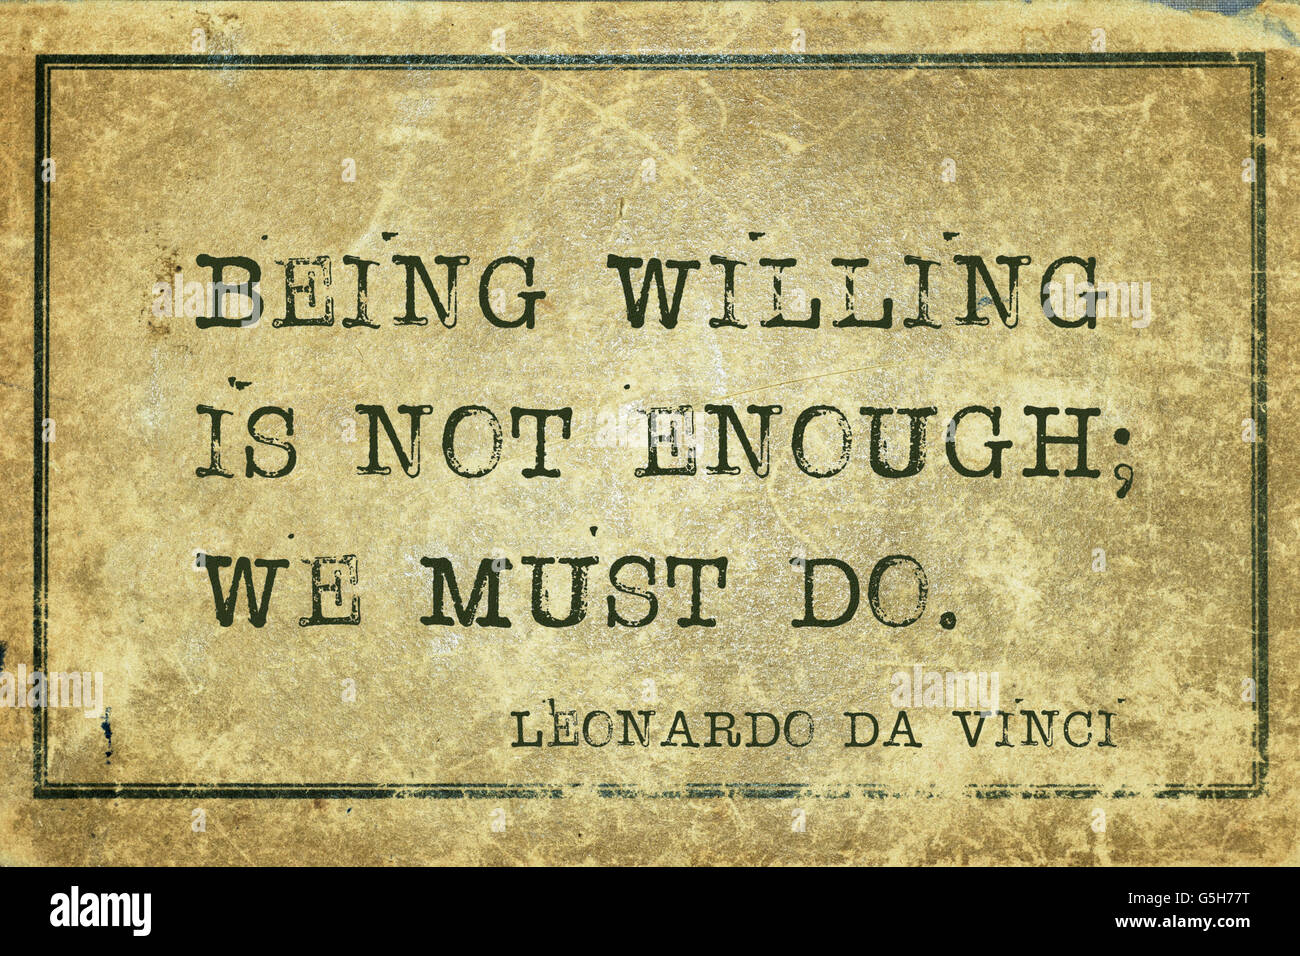 Being willing is not enough - ancient Italian artist Leonardo da Vinci quote printed on grunge vintage cardboard Stock Photo